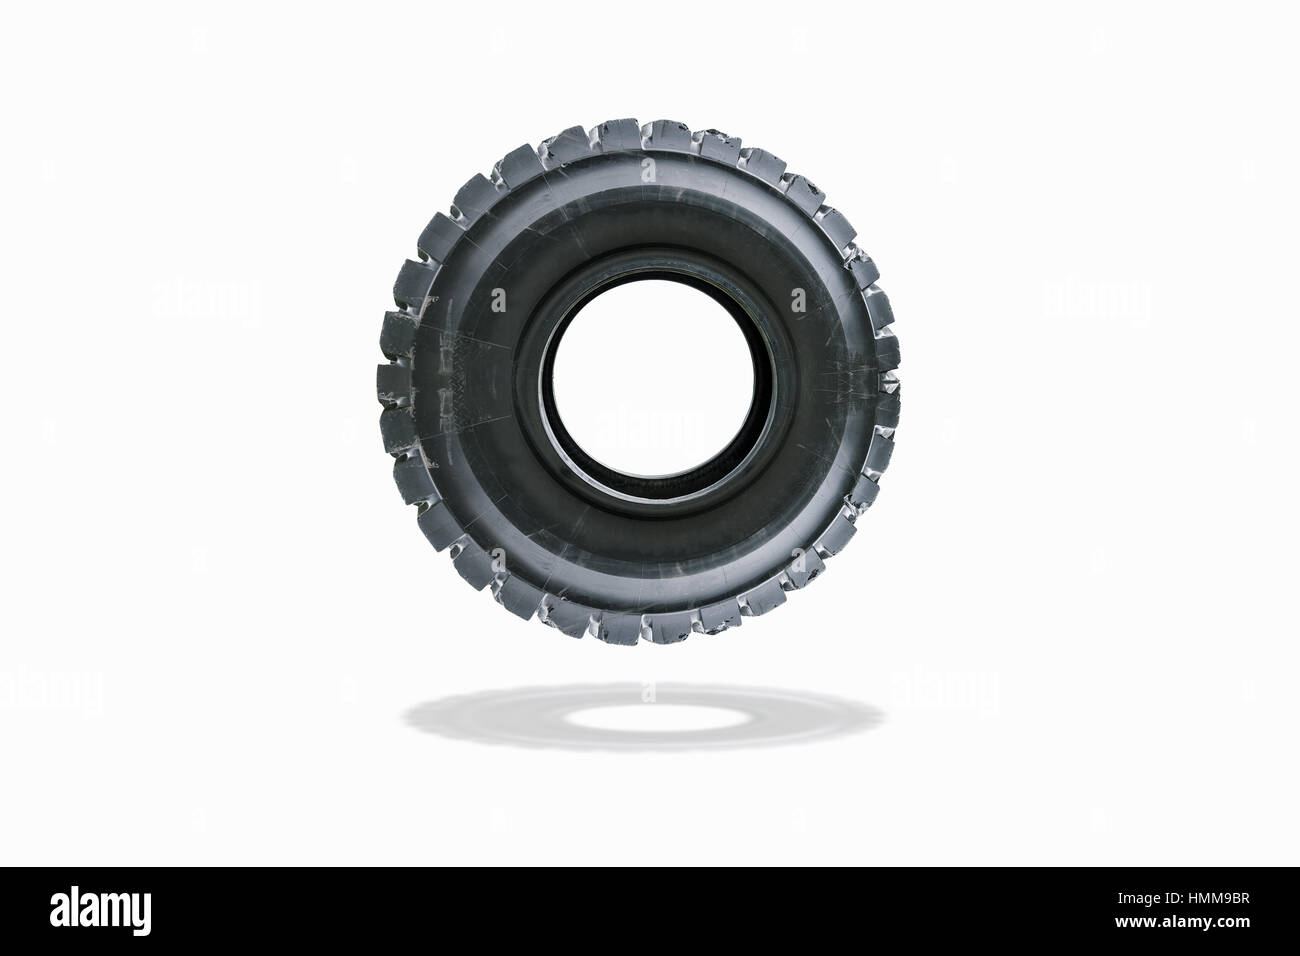 Giant tire of truck after using from heavy industrial which floating isolated on white background. Stock Photo